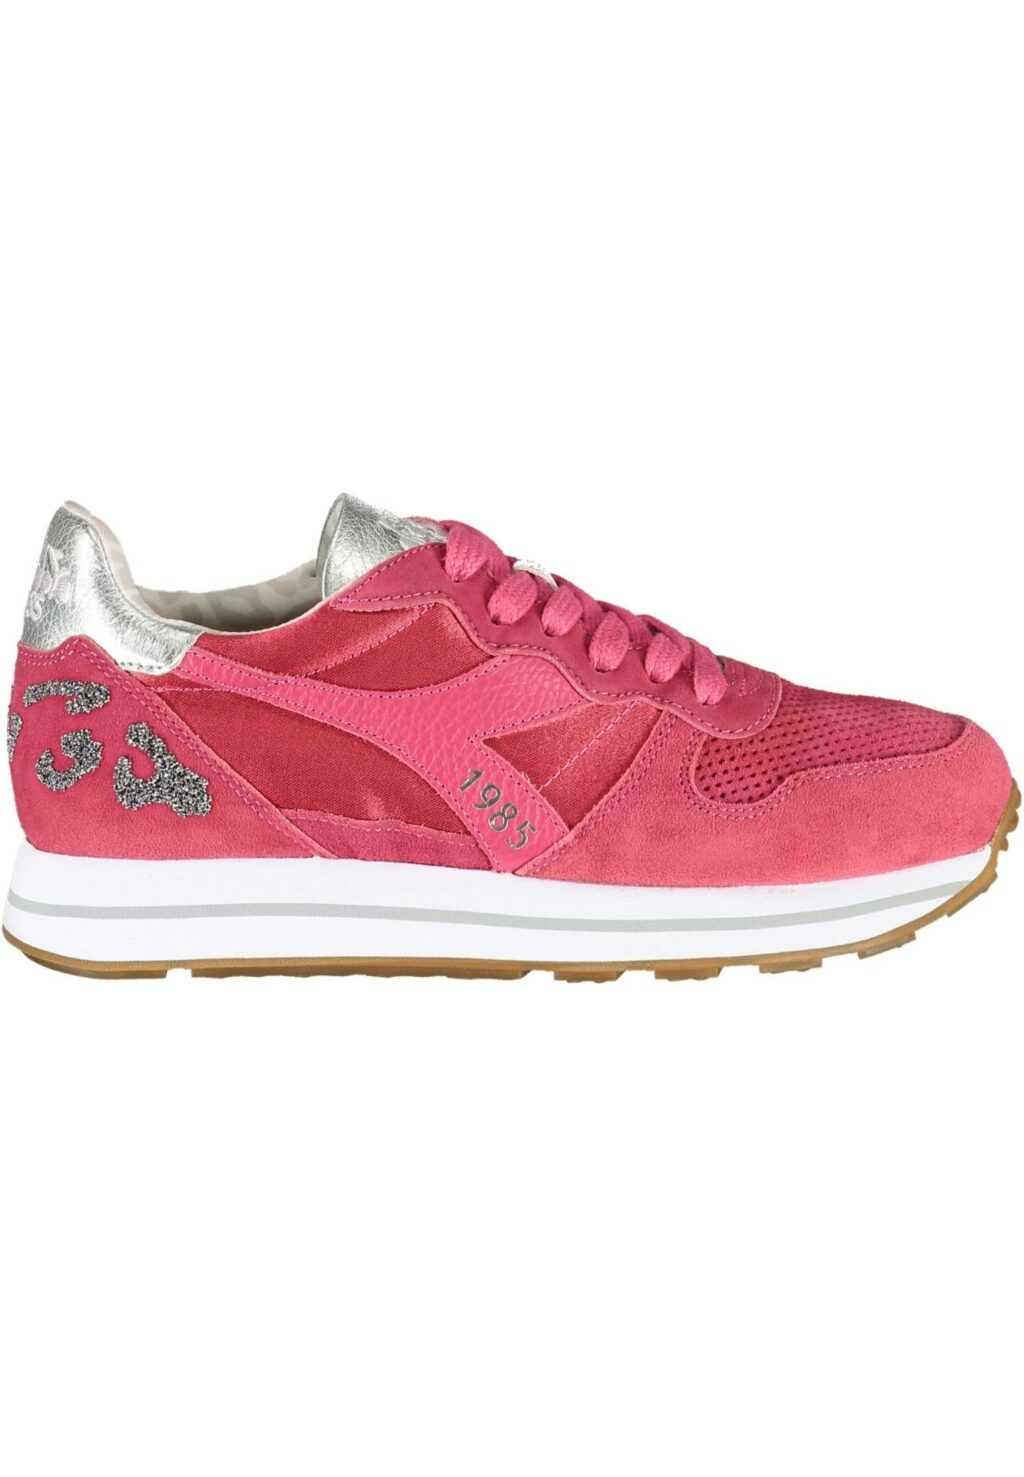 DIADORA SPORTS SHOES WOMAN RED 201174740F_ROSSO_45056